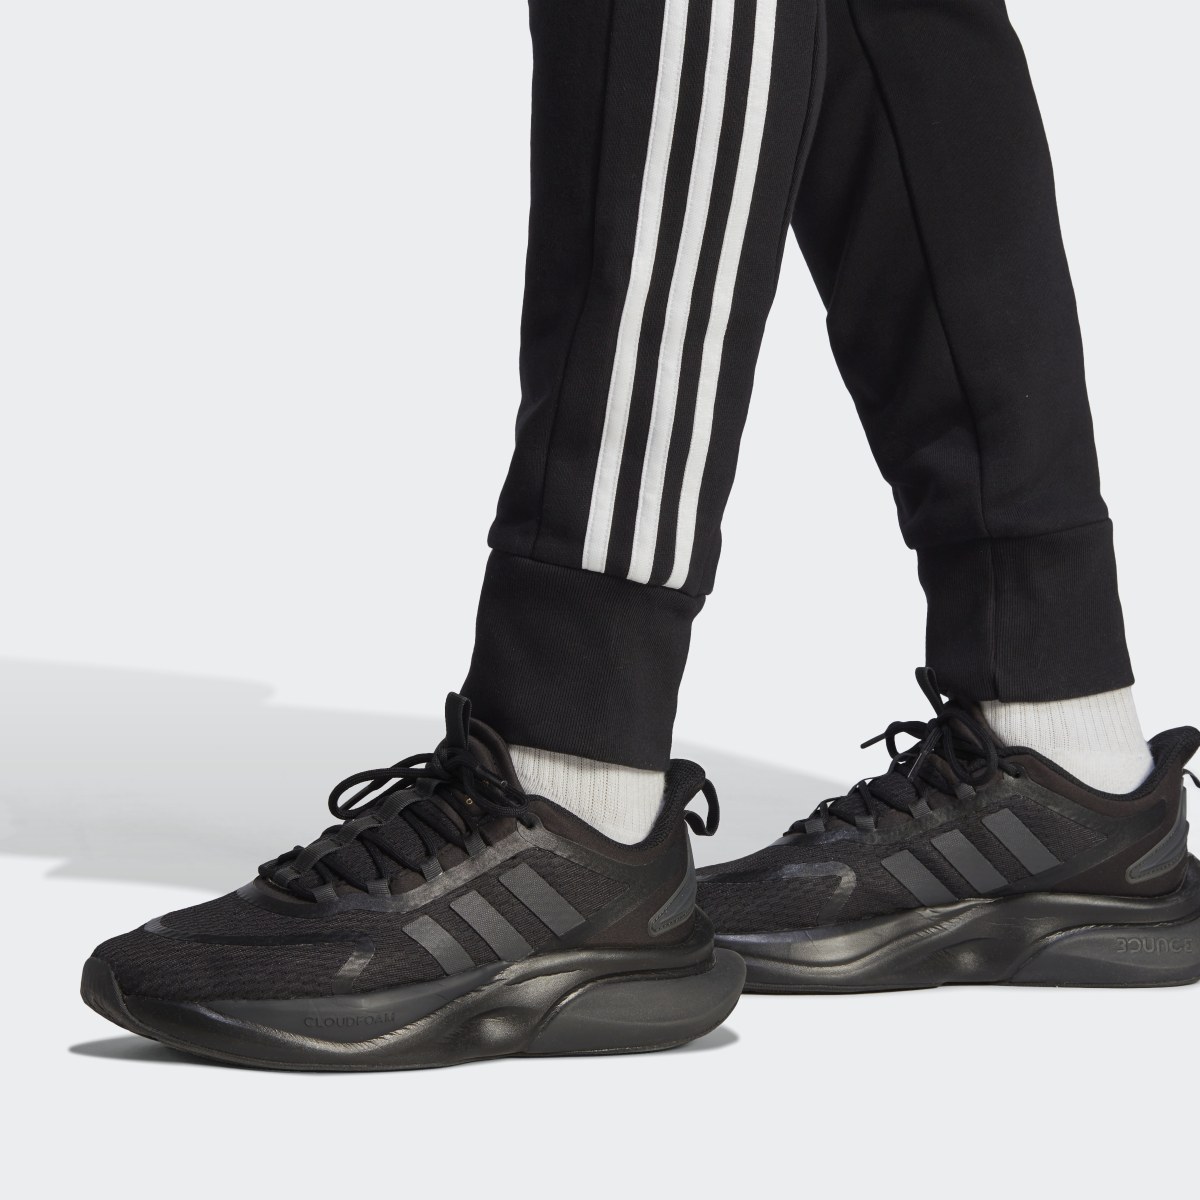 Adidas Essentials French Terry Tapered Cuff 3-Stripes Pants. 8